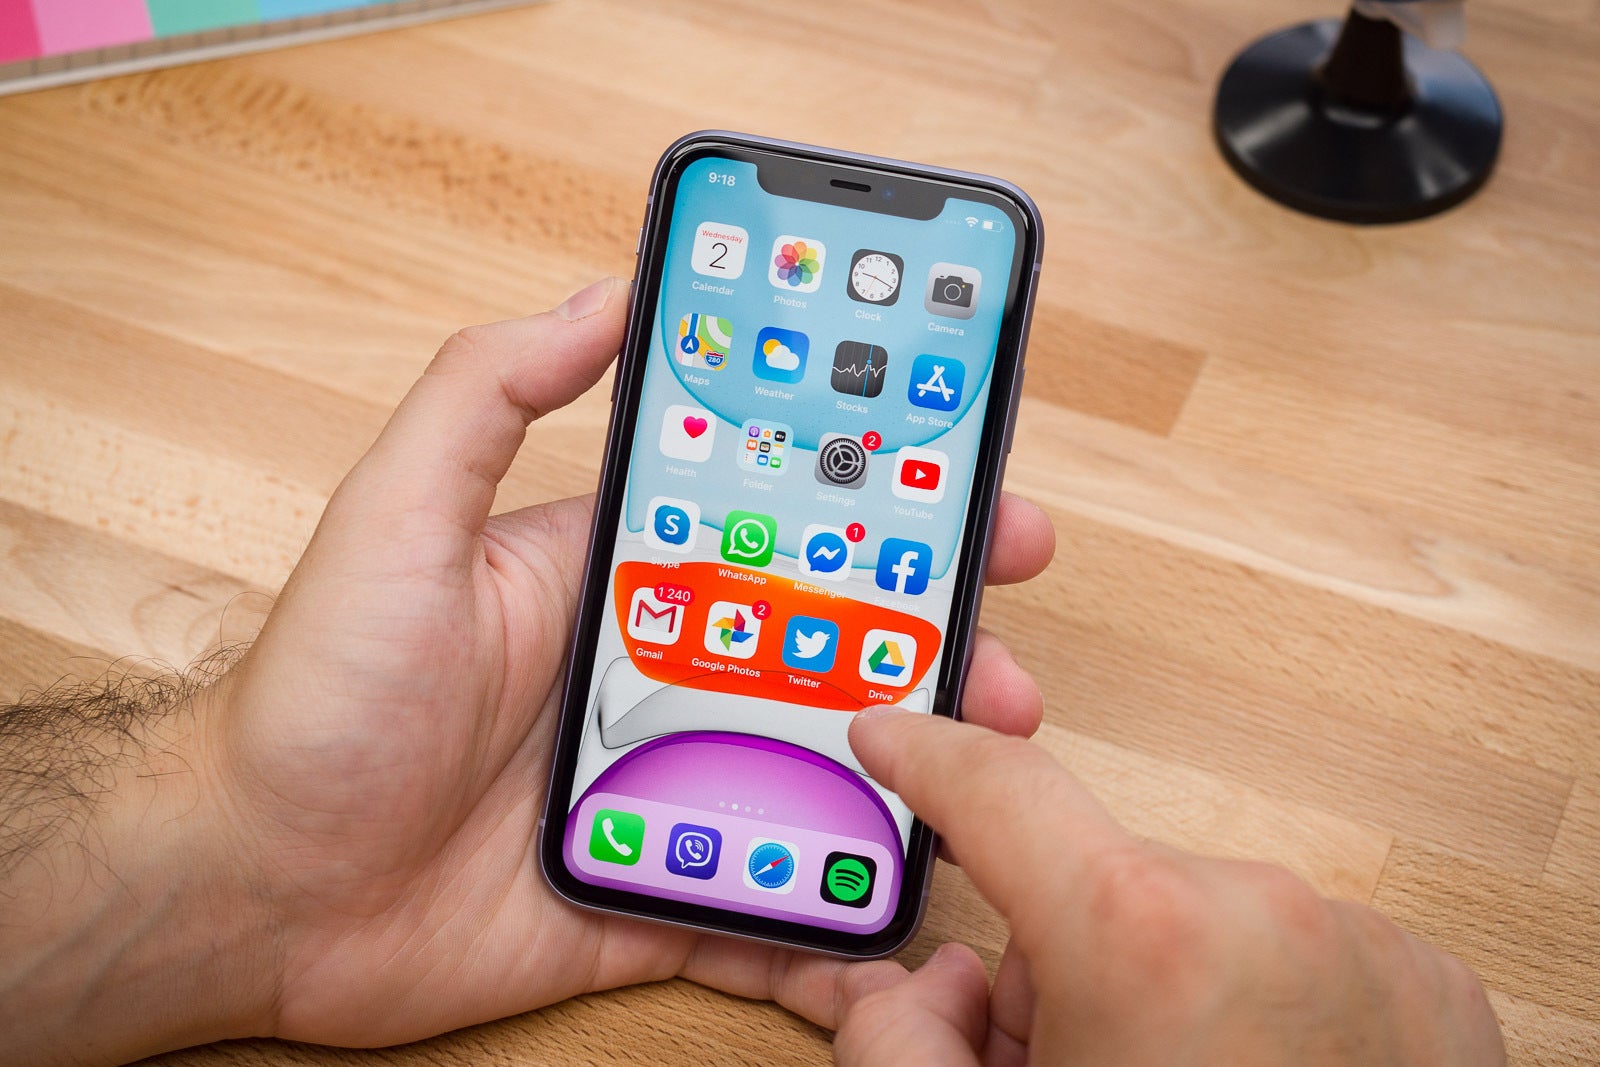 The iPhone 11 with its thick bezels and an LCD screen is now gone. Good riddance. - Apple's refreshed iPhone lineup ditches two models, check out which